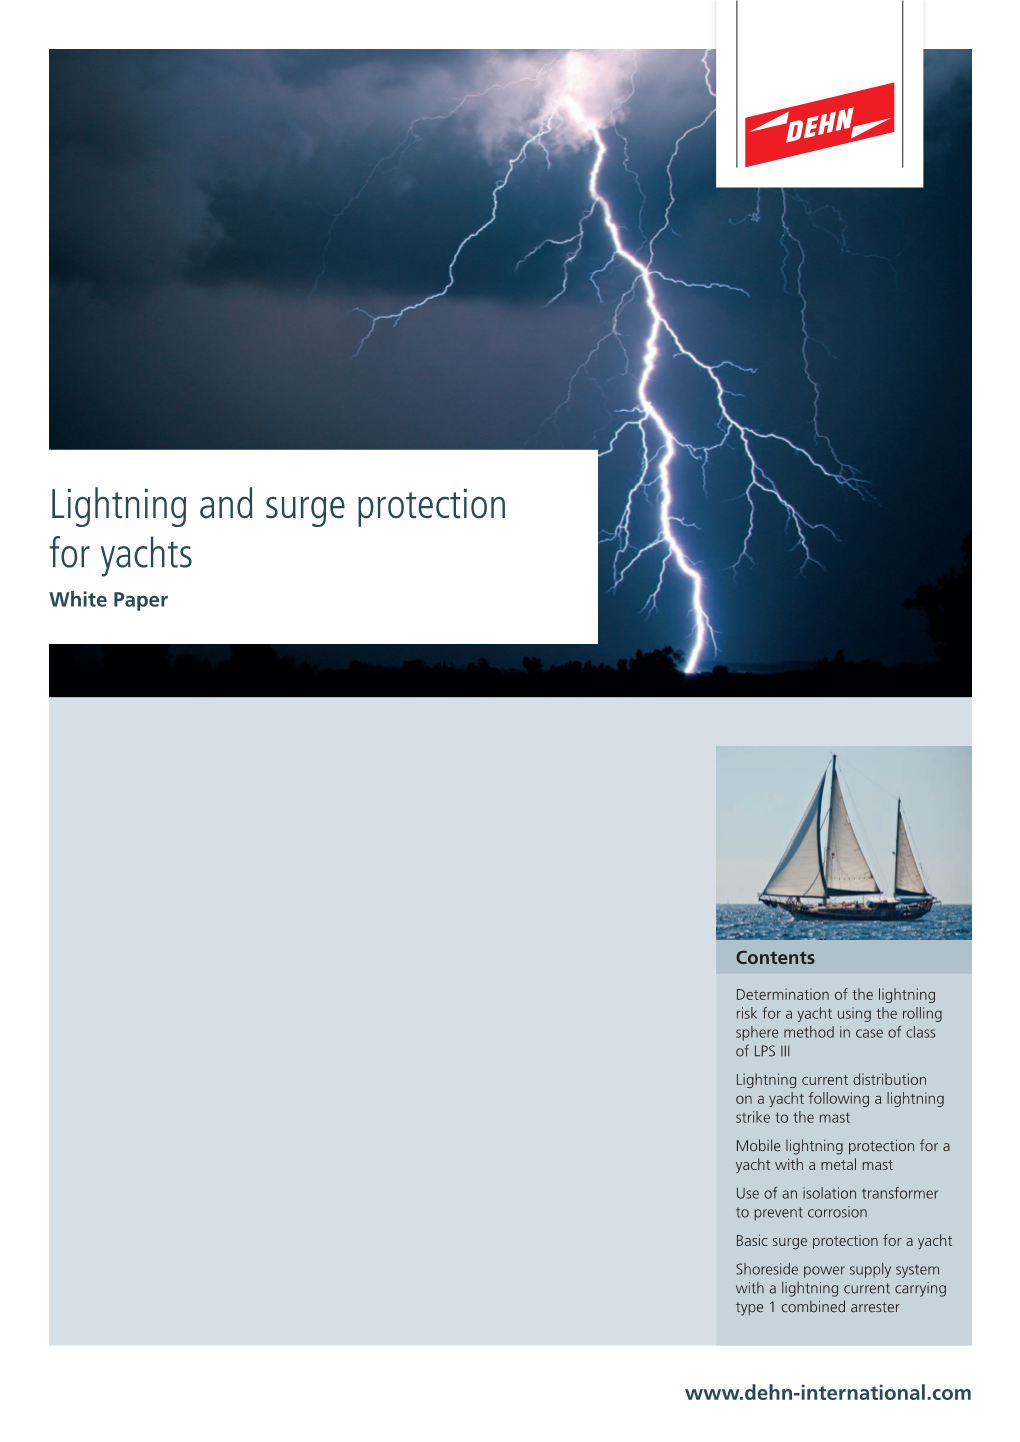 Lightning and Surge Protection for Yachts White Paper